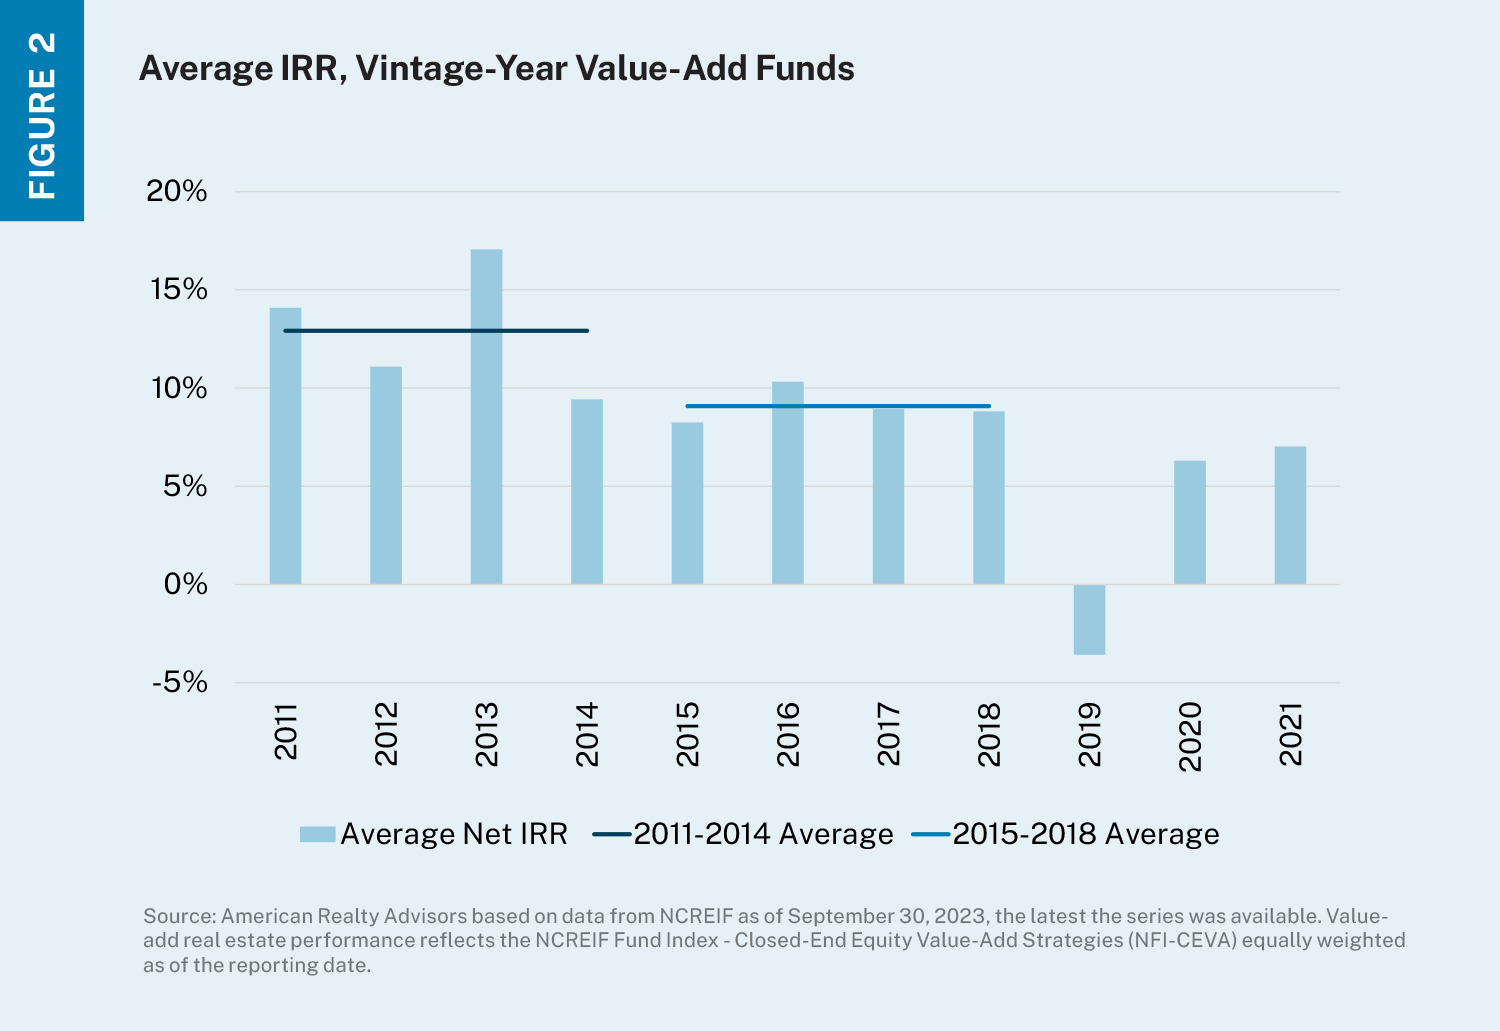 Bar chart showing the average net IRR return for a closed-end fund in each vintage year (year capital deployment commenced) from 2011 through 2021 with lines showing where the 2011-2014 and 2015-2018 averages were. 